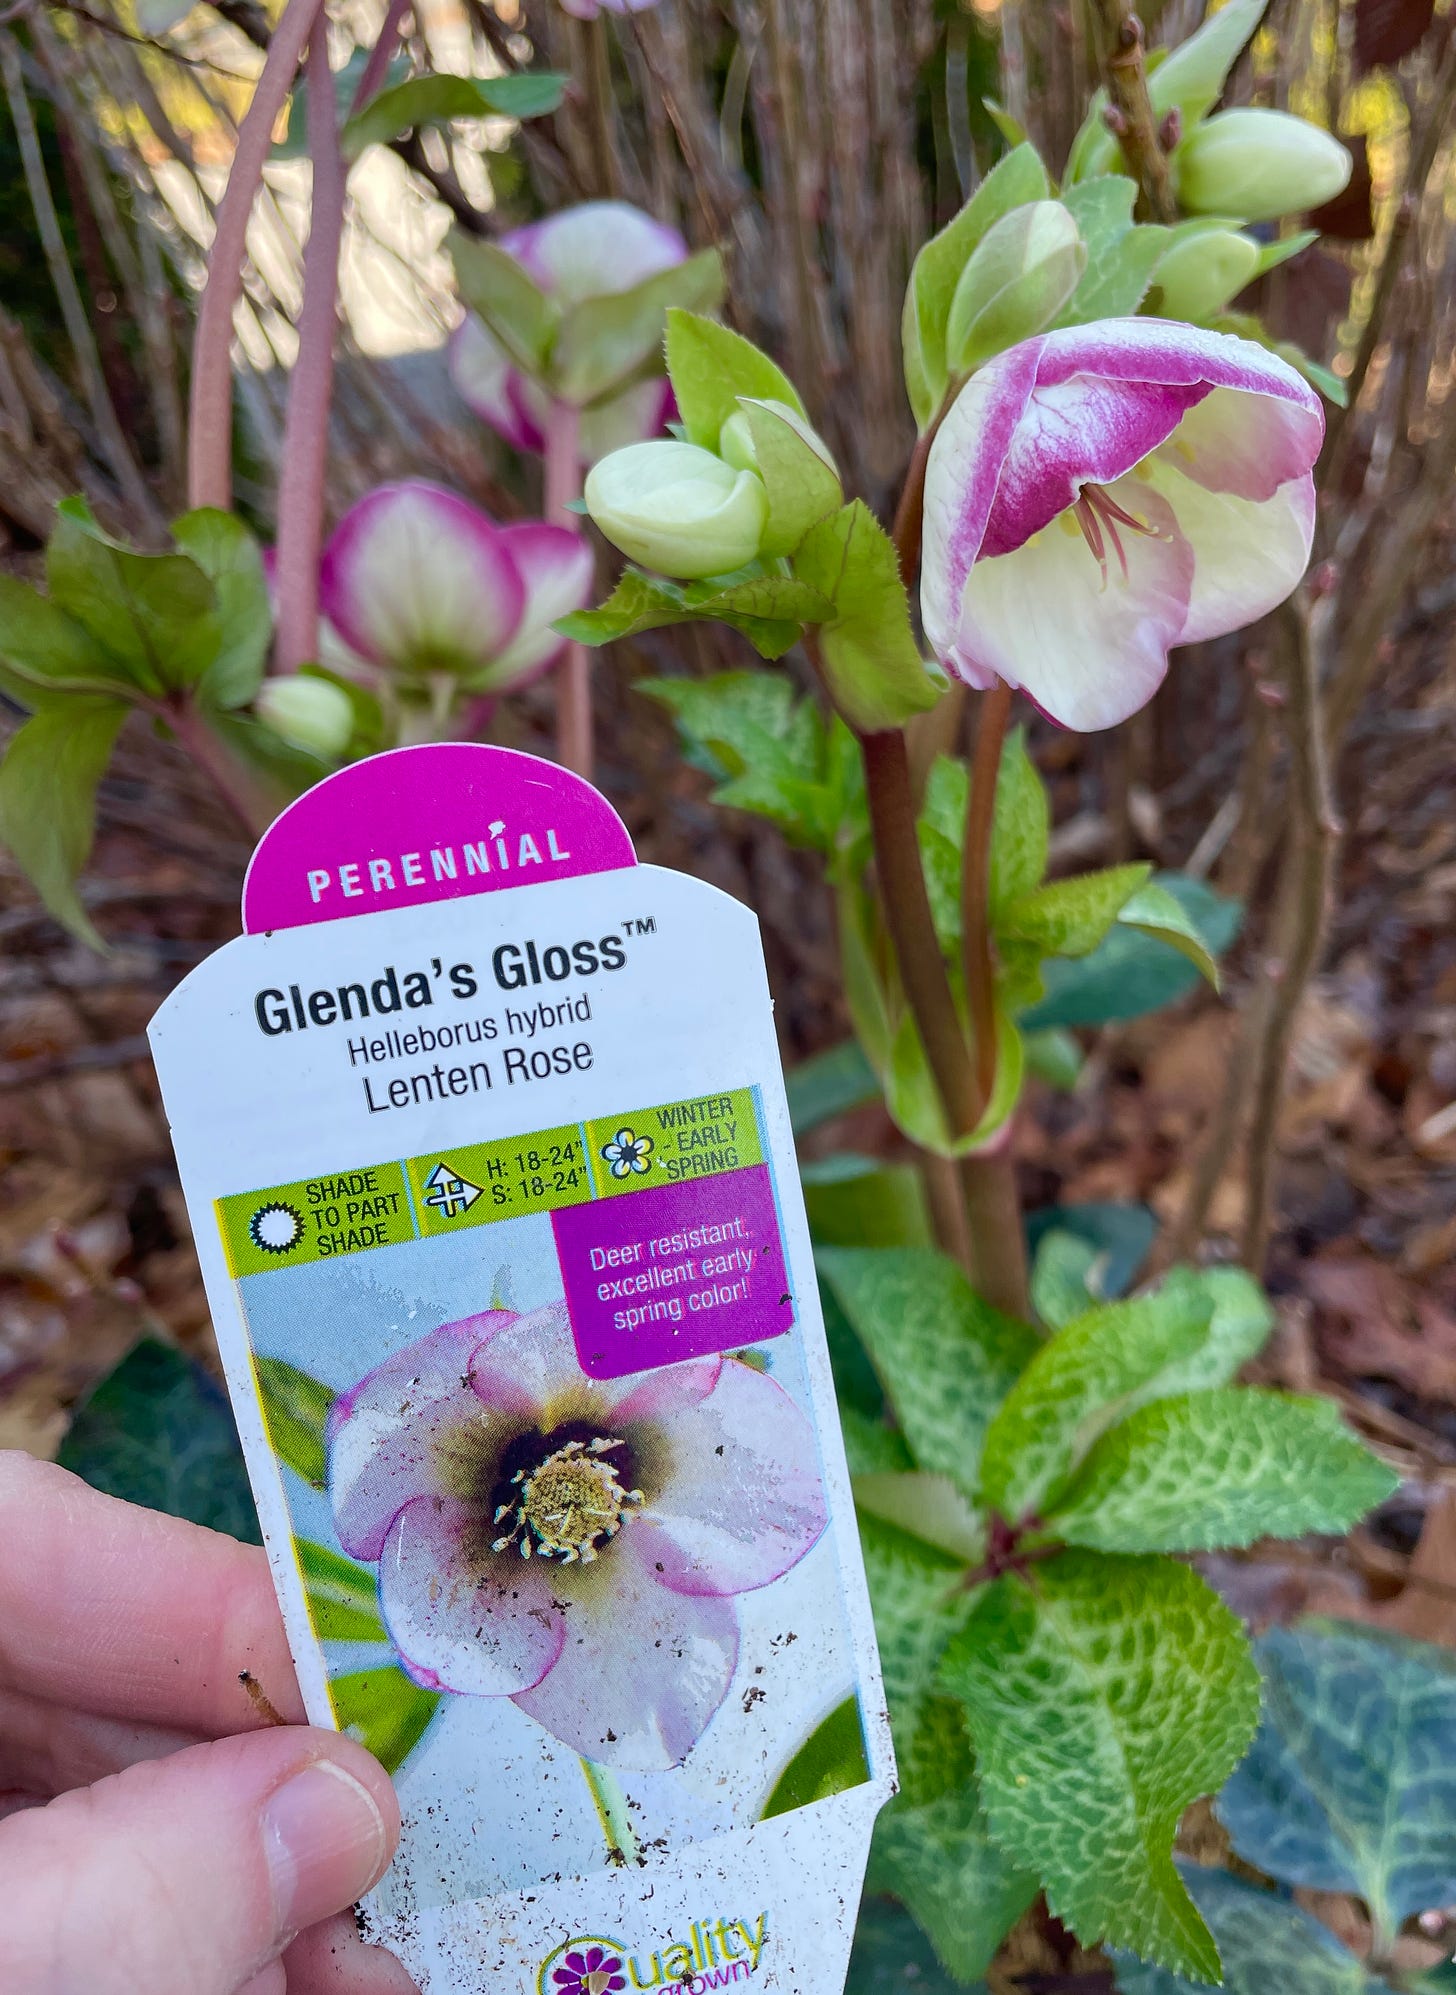 This new cultivar just went into the Cottage Garden today: Hellebore ‘Glenda’s Gloss’